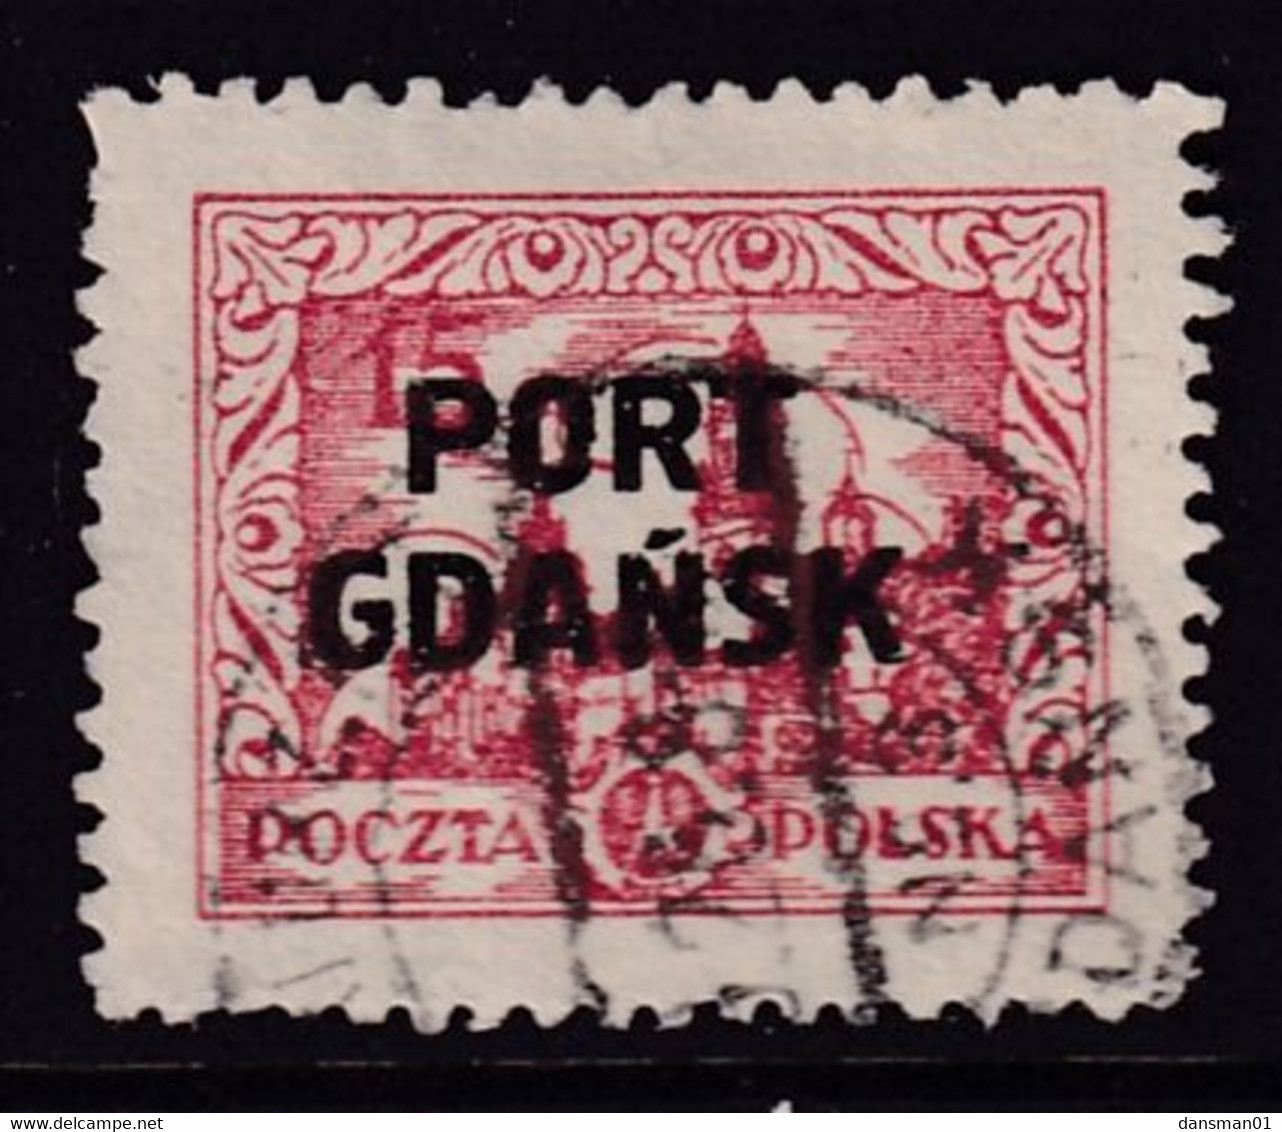 Port Gdansk 1926 Fi 14a Used Type I - Occupations